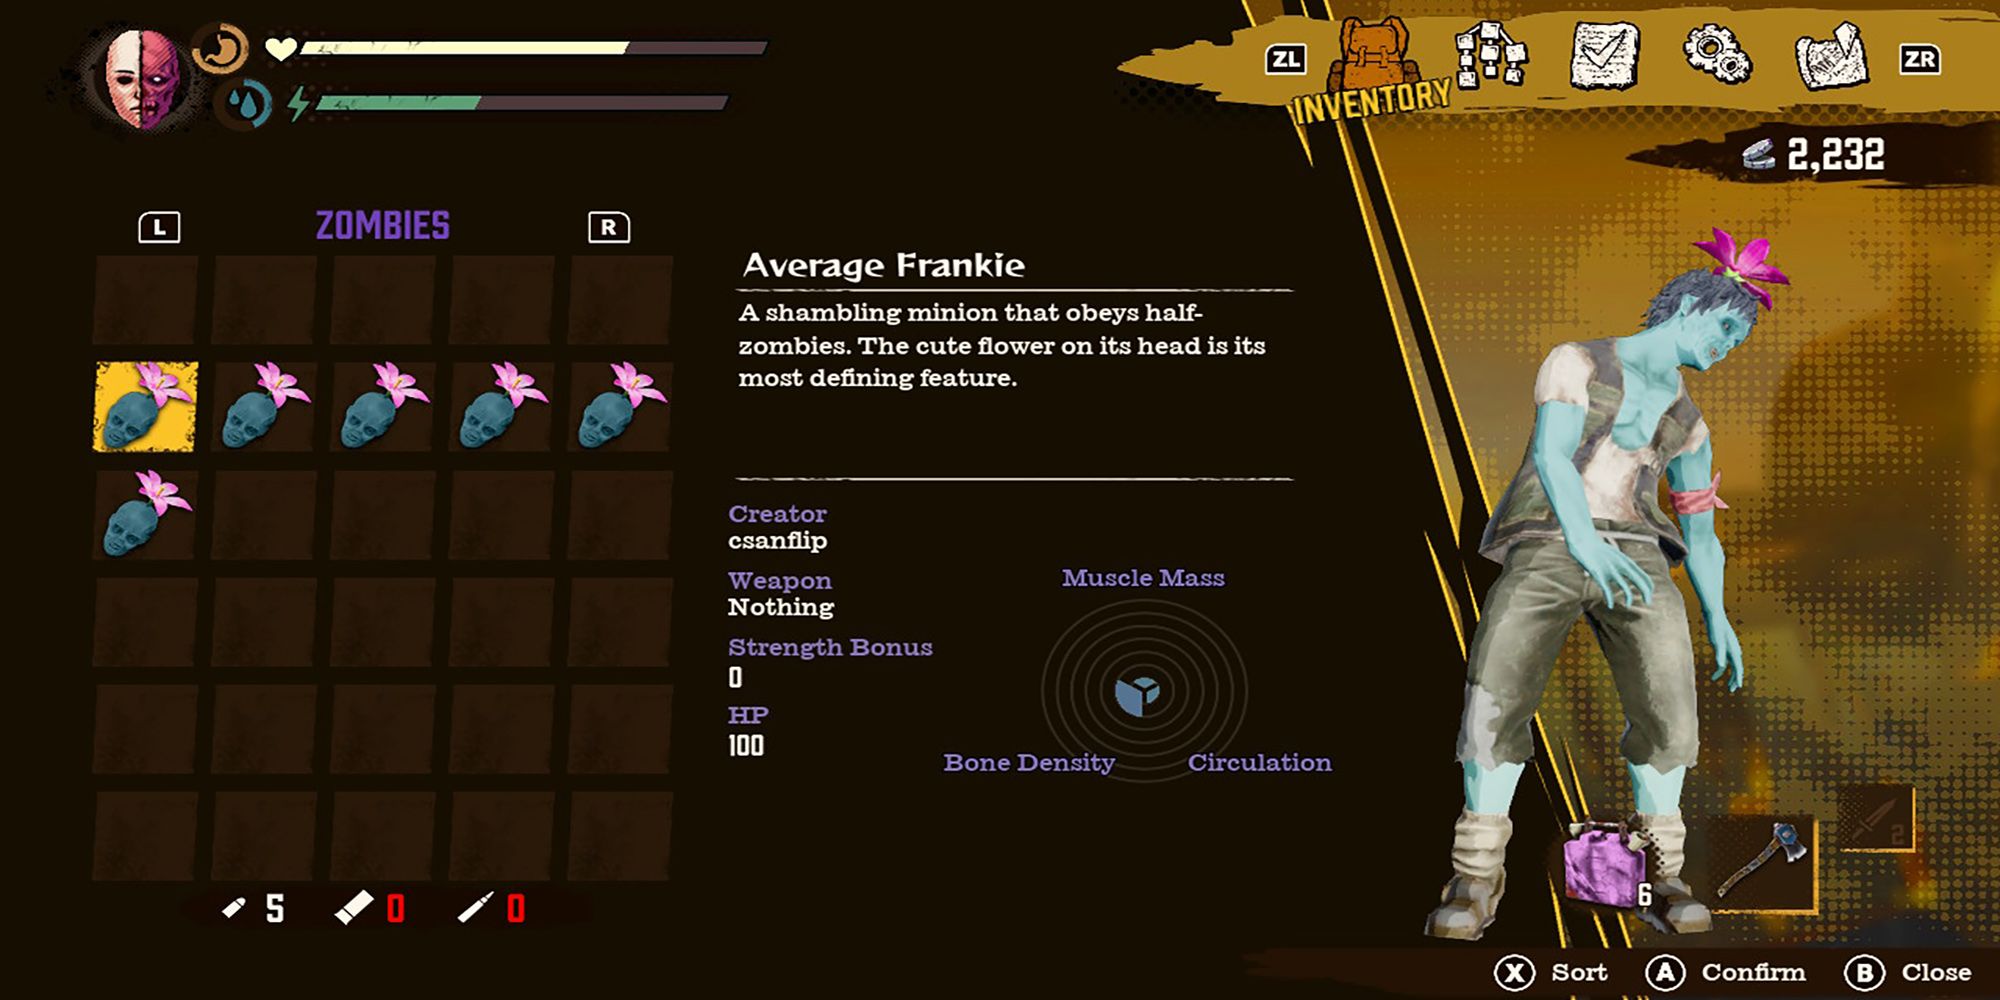 The zombie inventory displays the stats of an unarmed Average Frankie in Deadcraft.